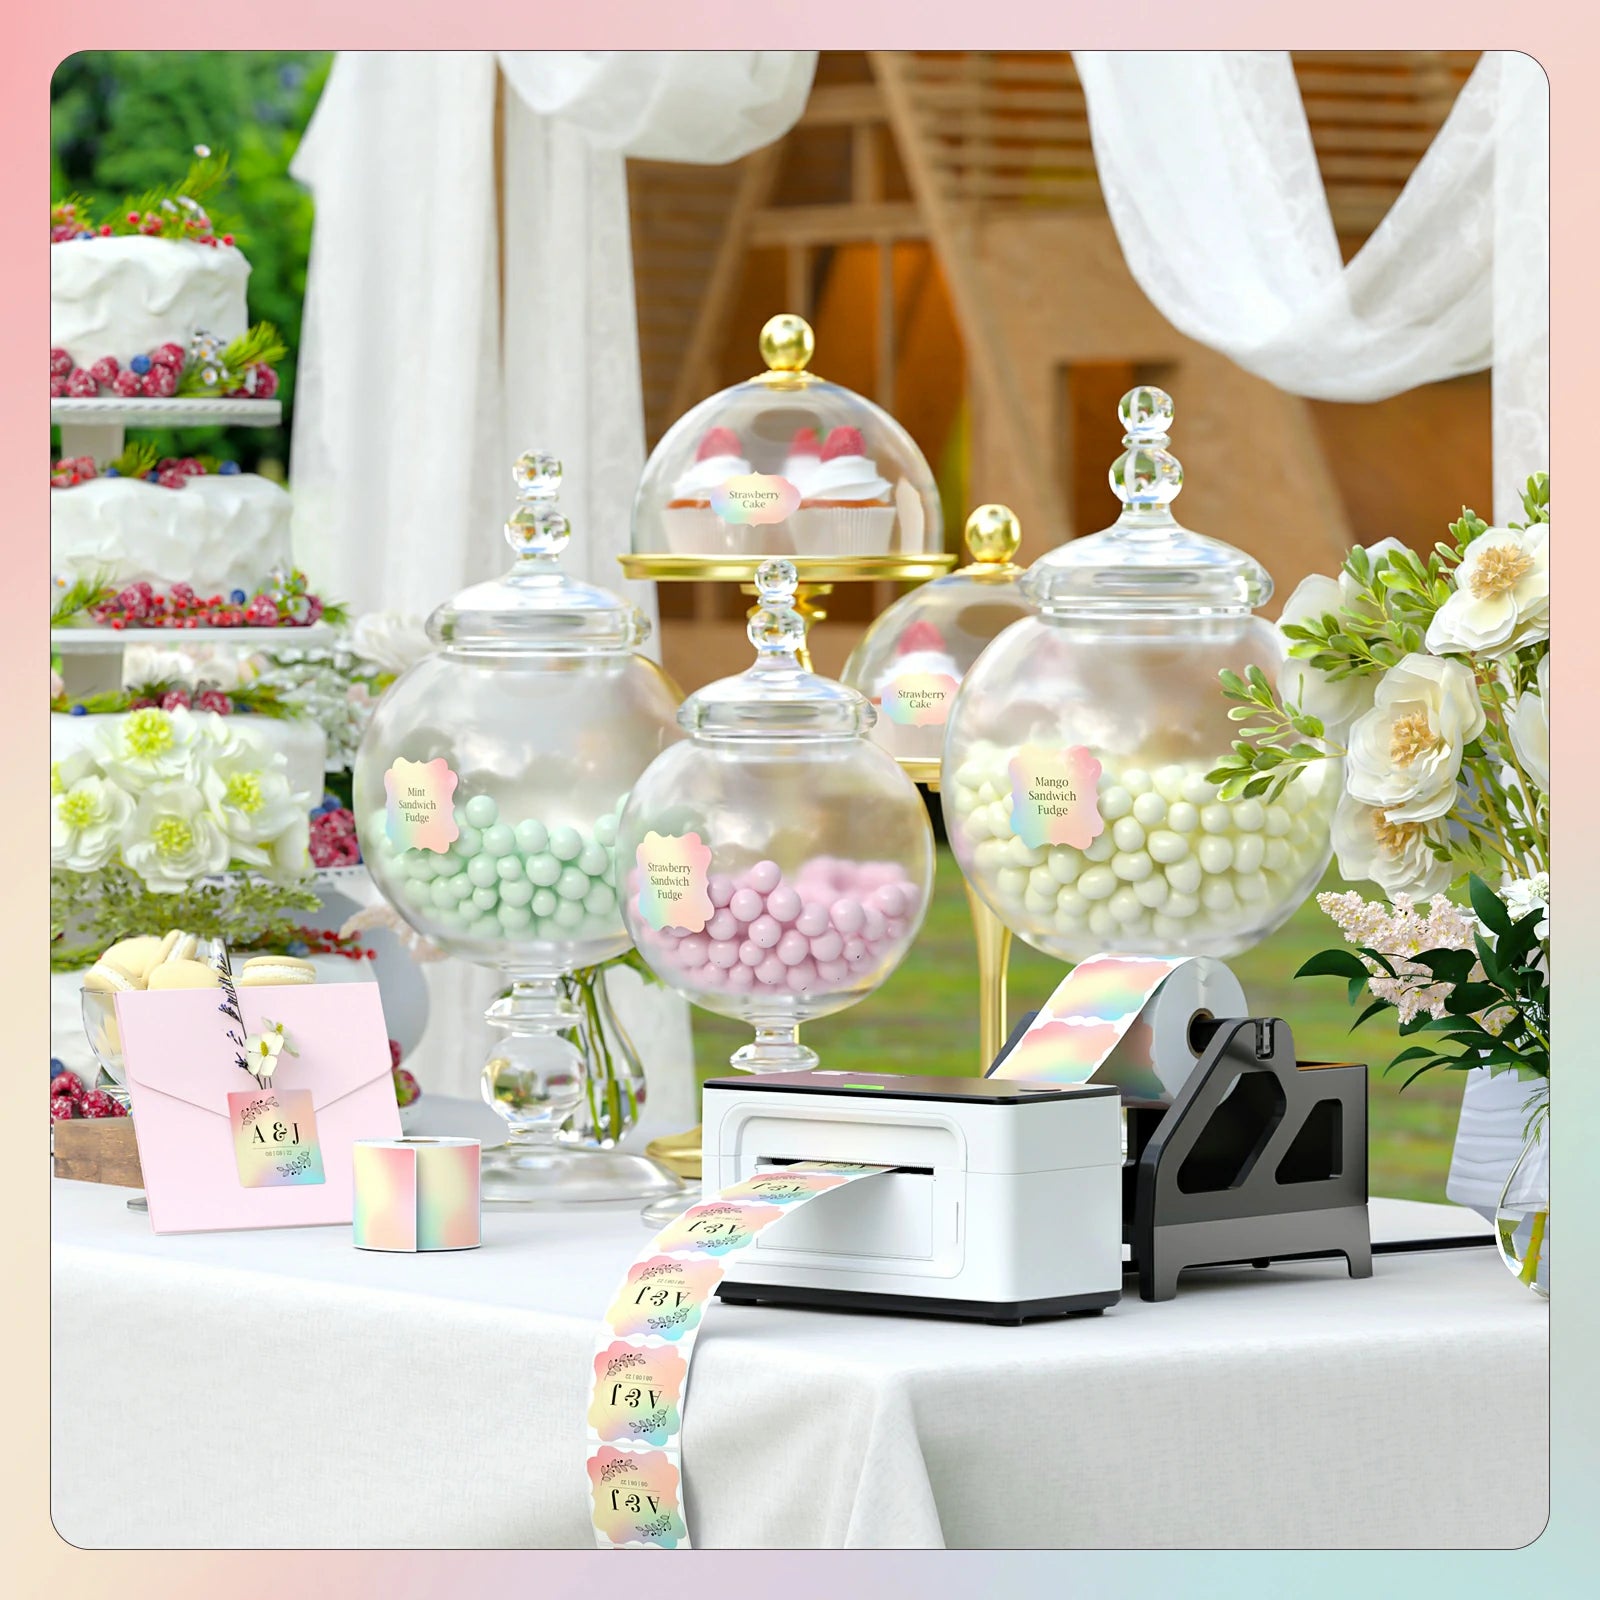 MUNBYN rainbow-coloured fancy labels are ideal for wedding favors.